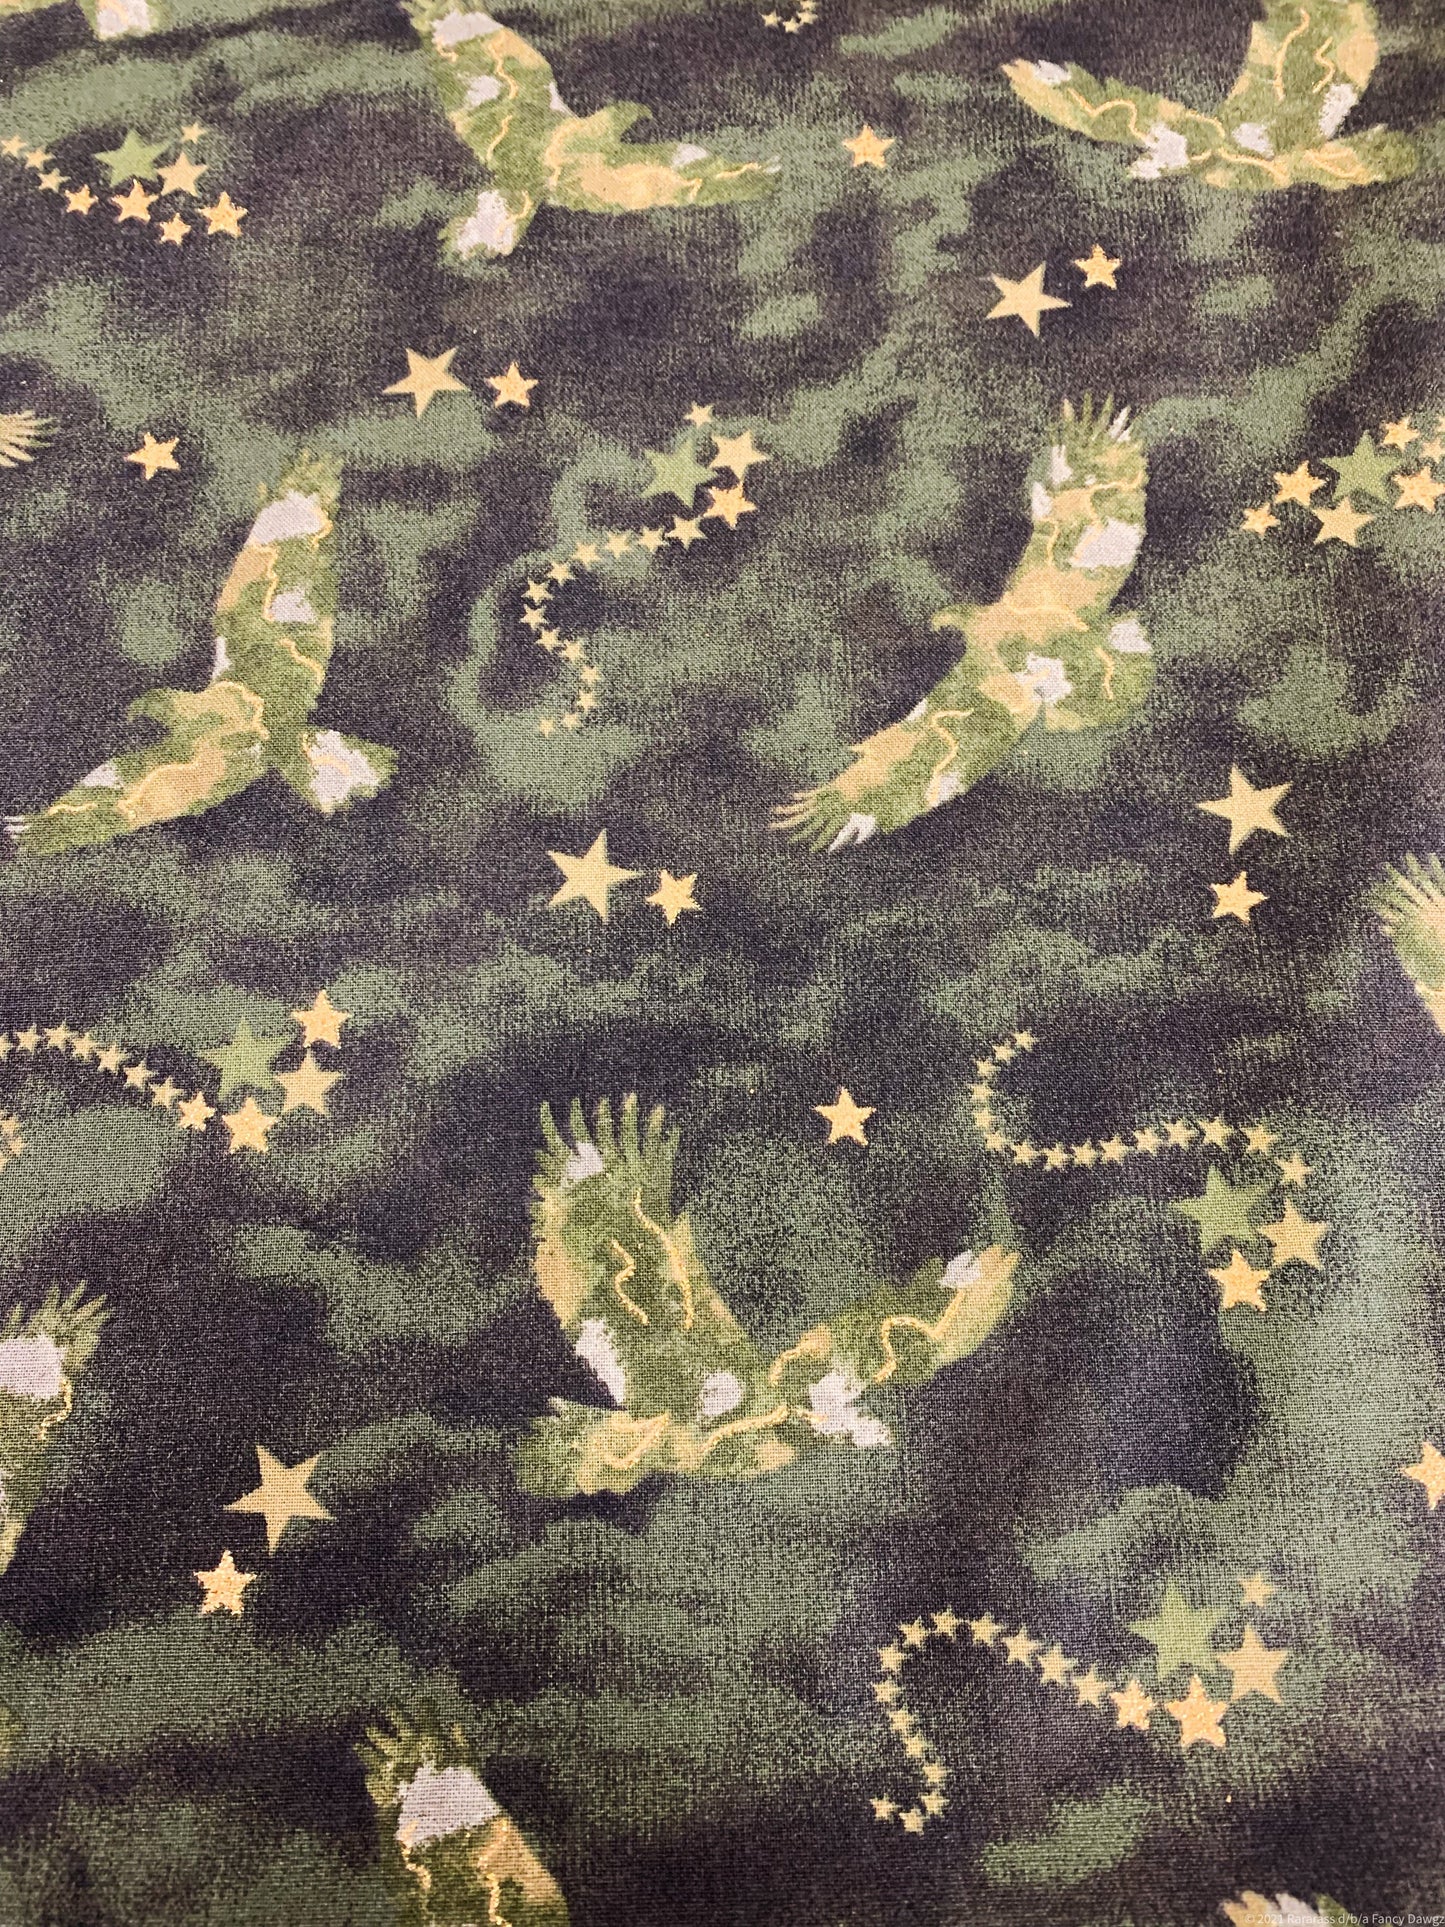 Army Green Eagle fabric 16702 Eagles with Metallic Gold